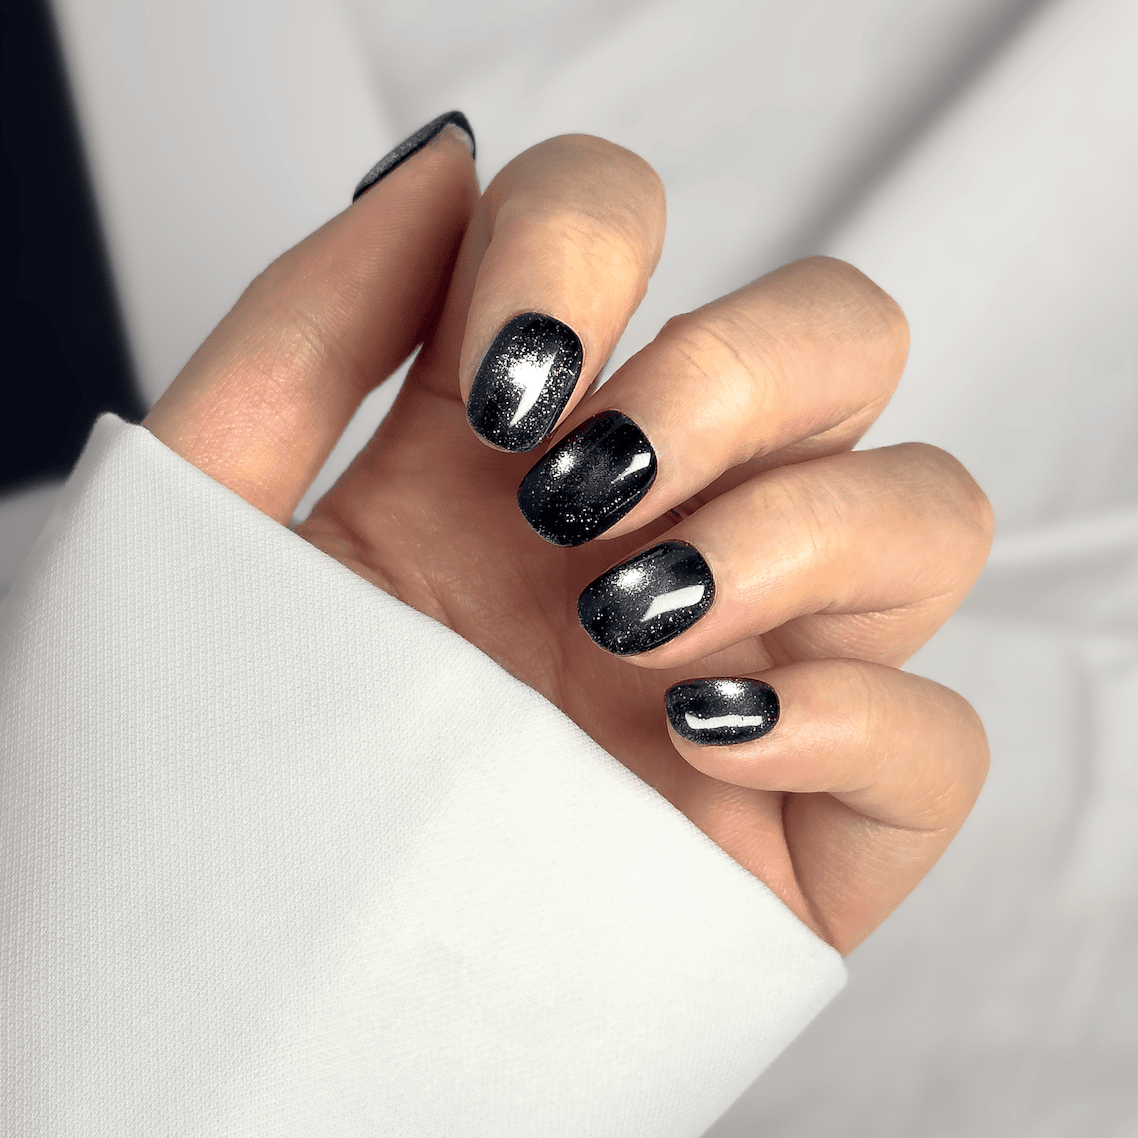 Close-up of a hand wearing MyLilith's black press-on nails with a magnetic cat-eye gel finish, in a short, round shape.